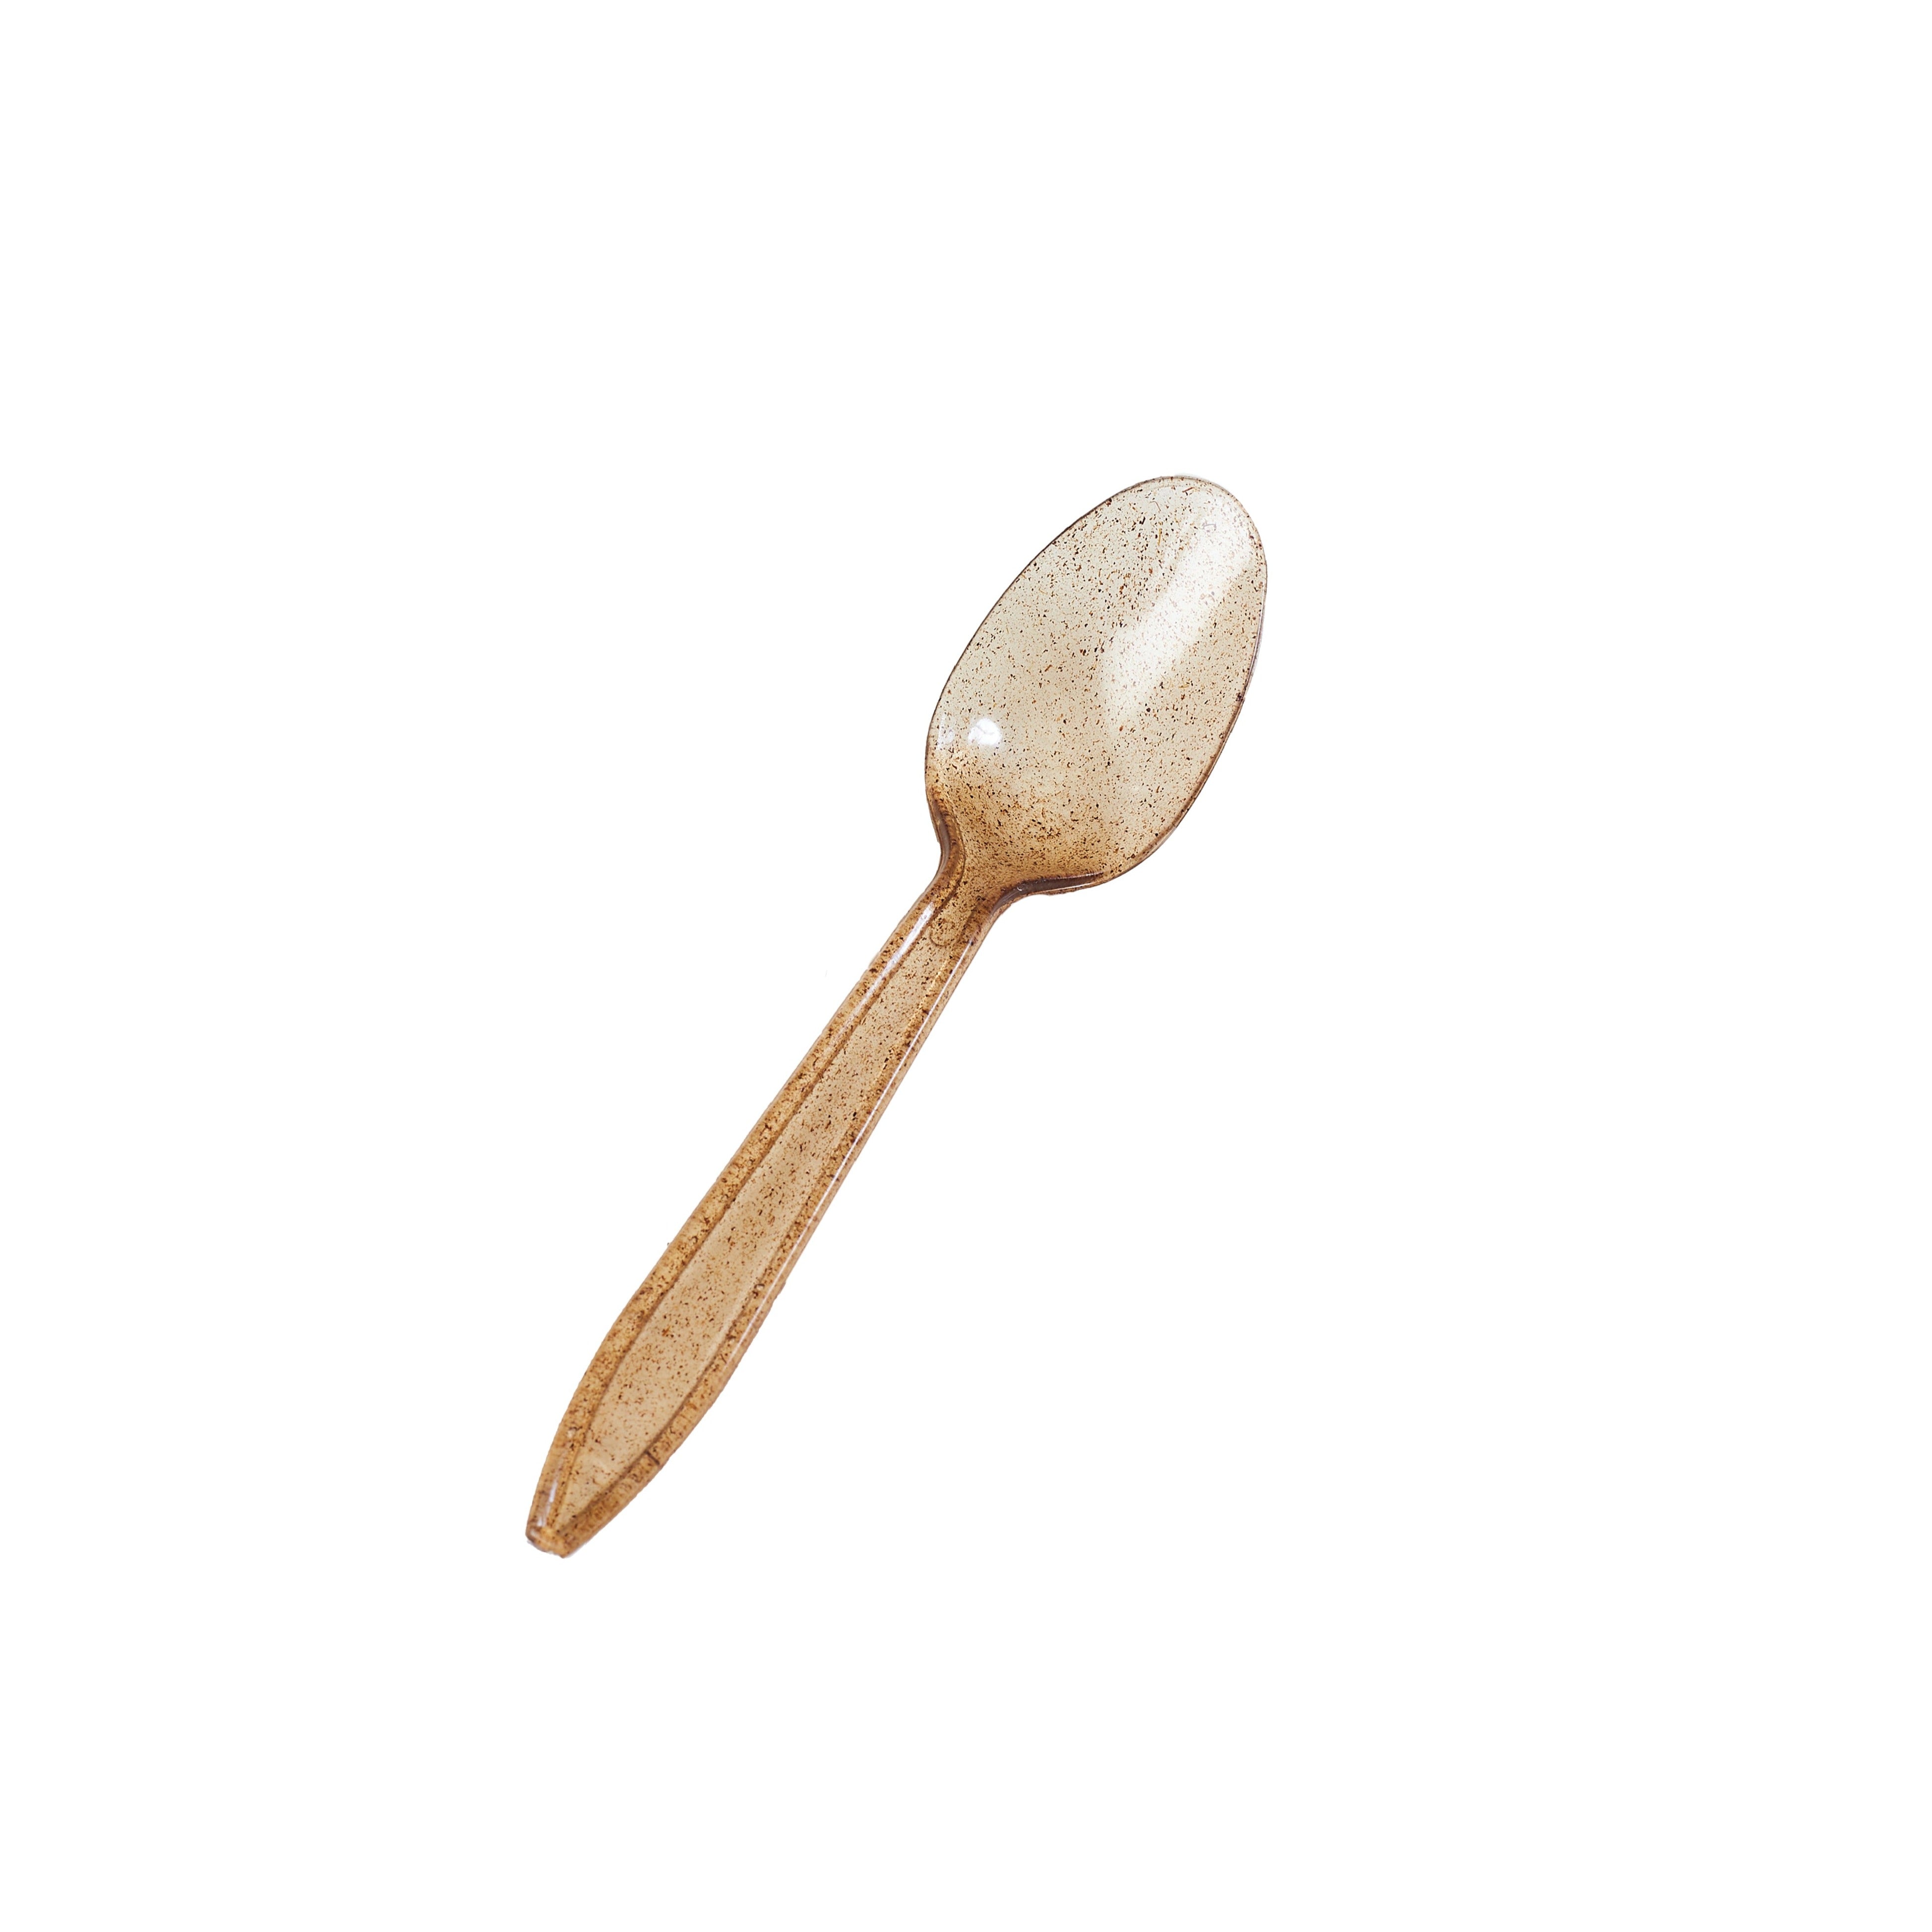 Sustainable Agave-Based Spoons